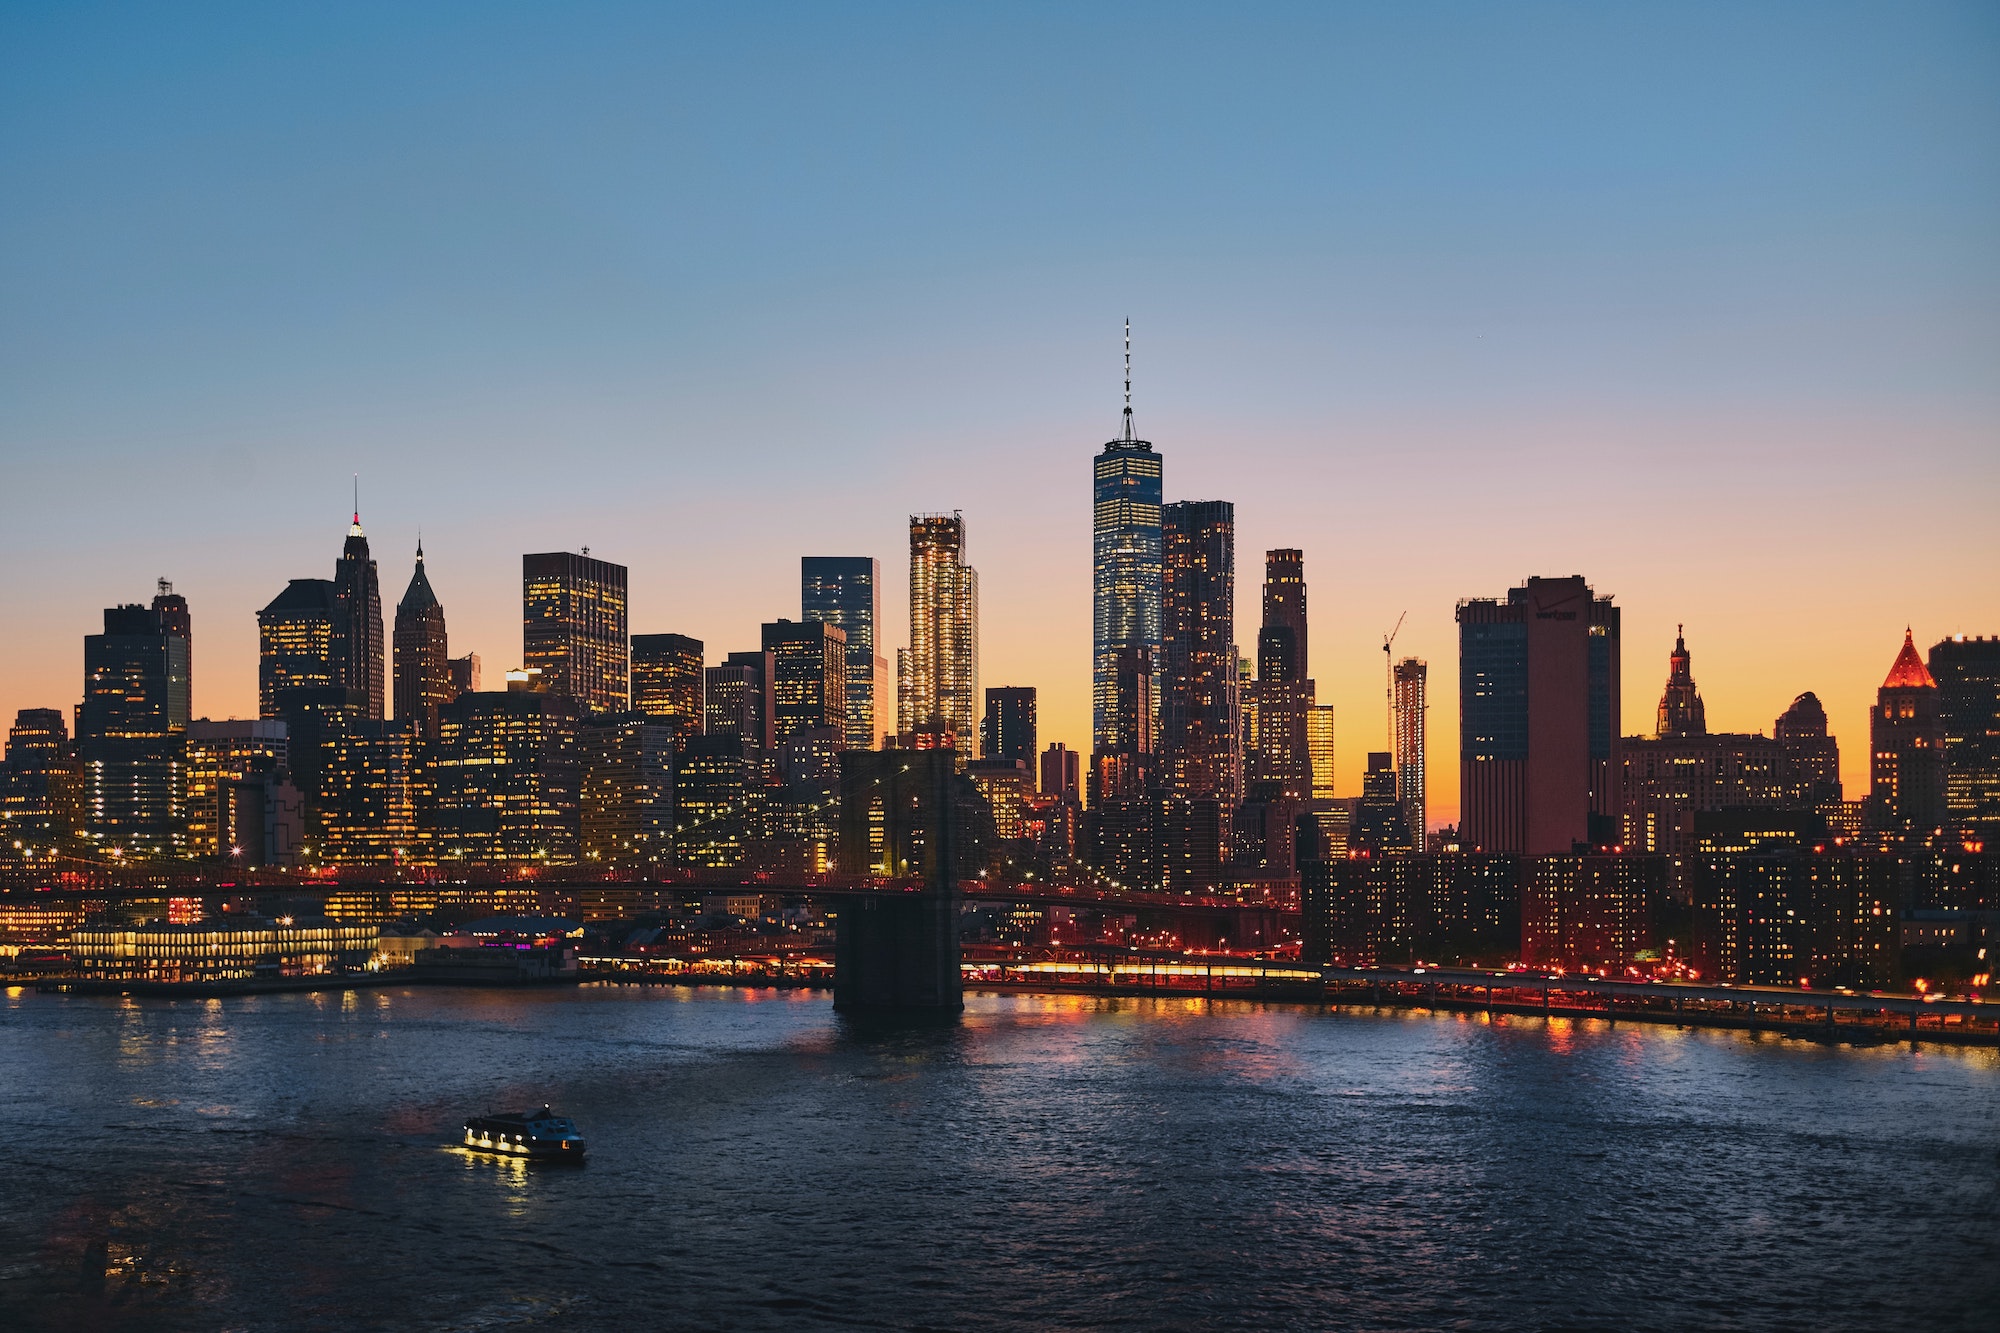 Things You Didn’t Know About the Population of New York City